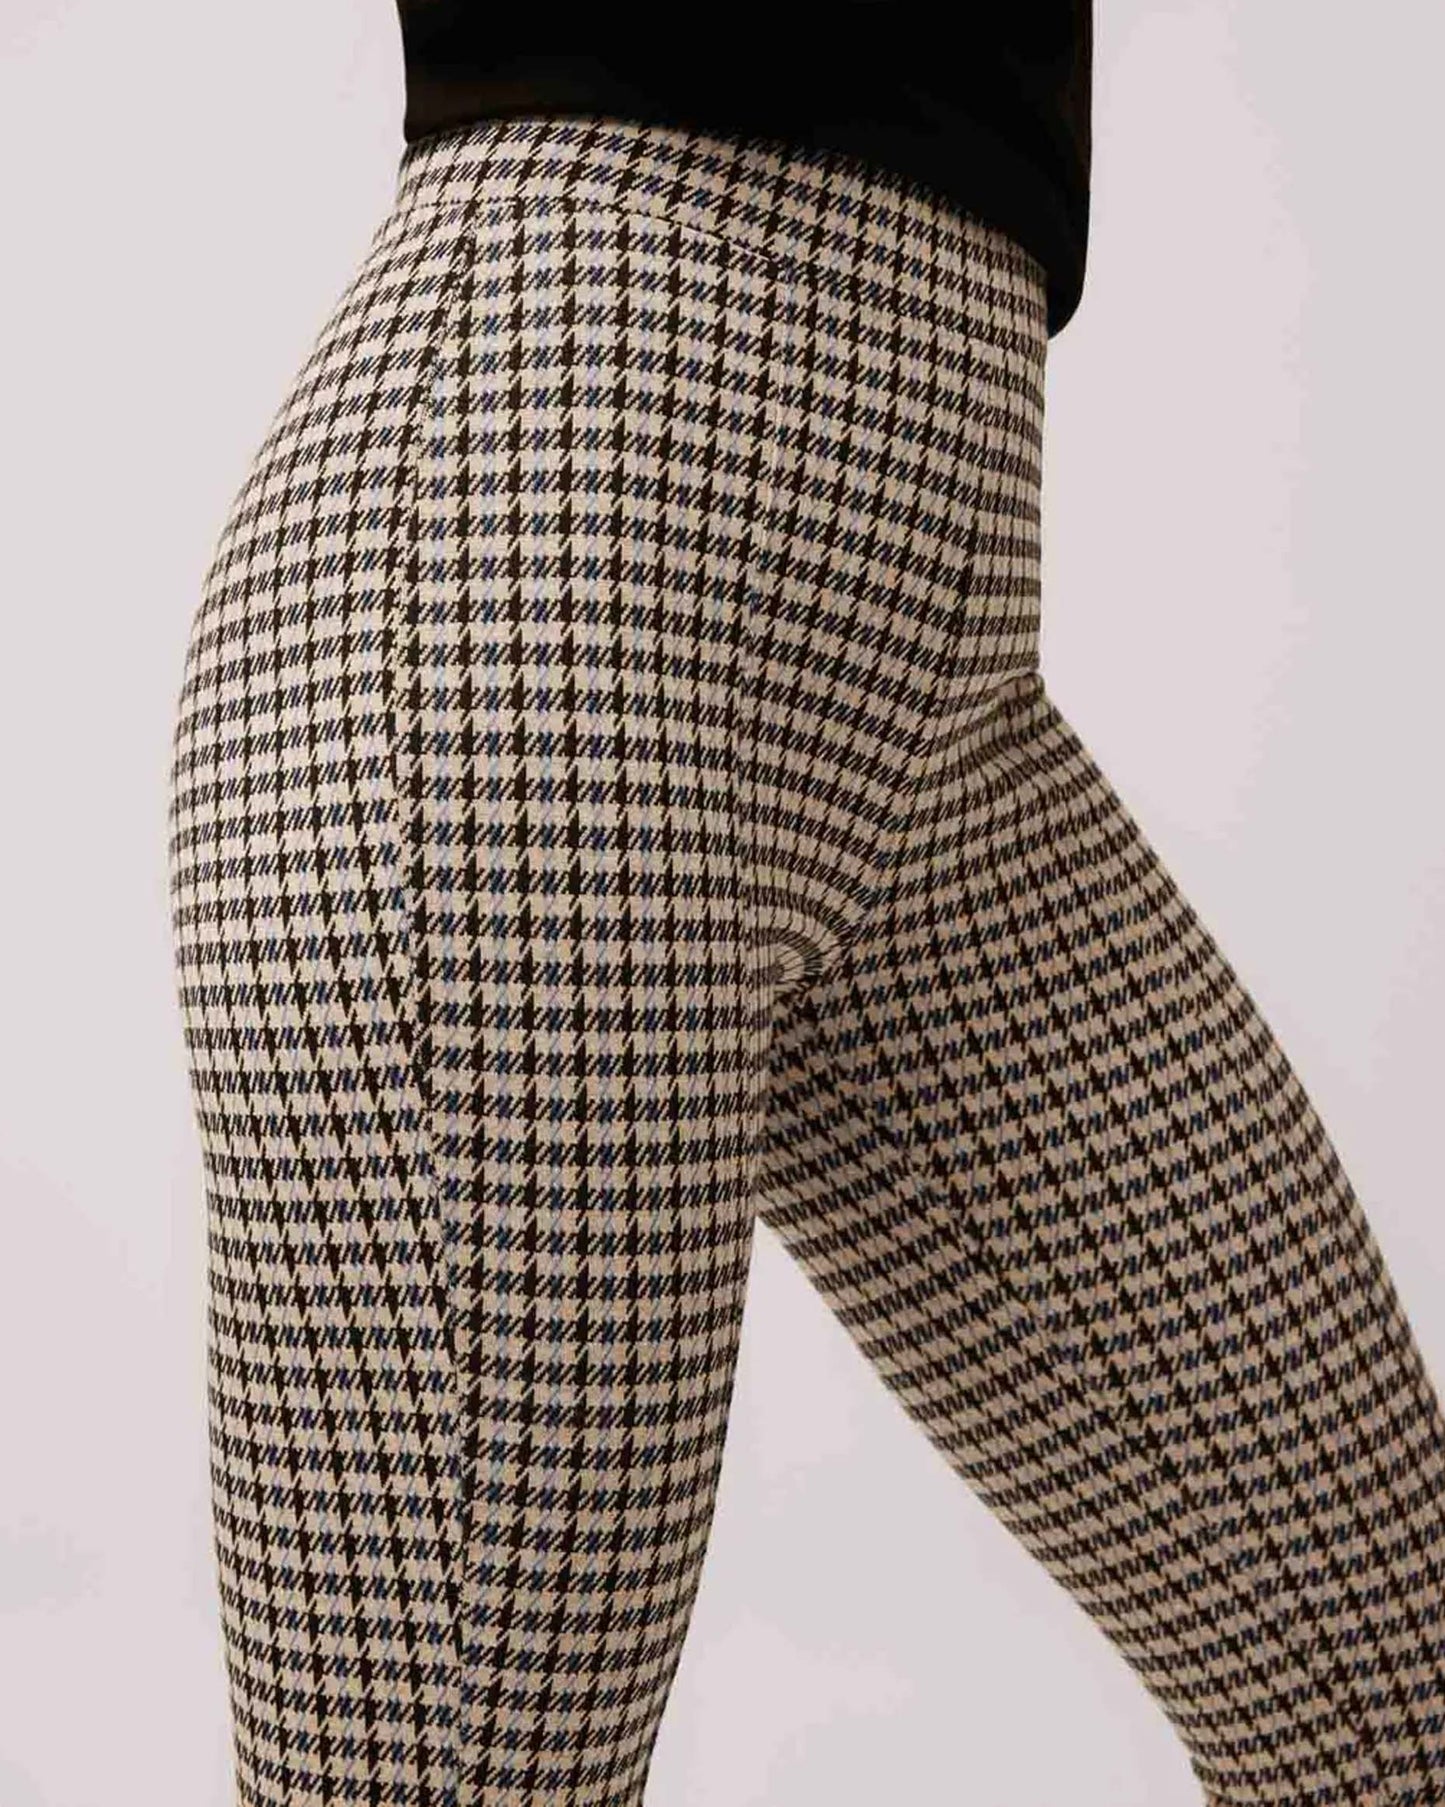 Ysabel Mora 70299 Check Treggings - High waisted light beige trouser leggings with a black and blue houndstooth gingham style check